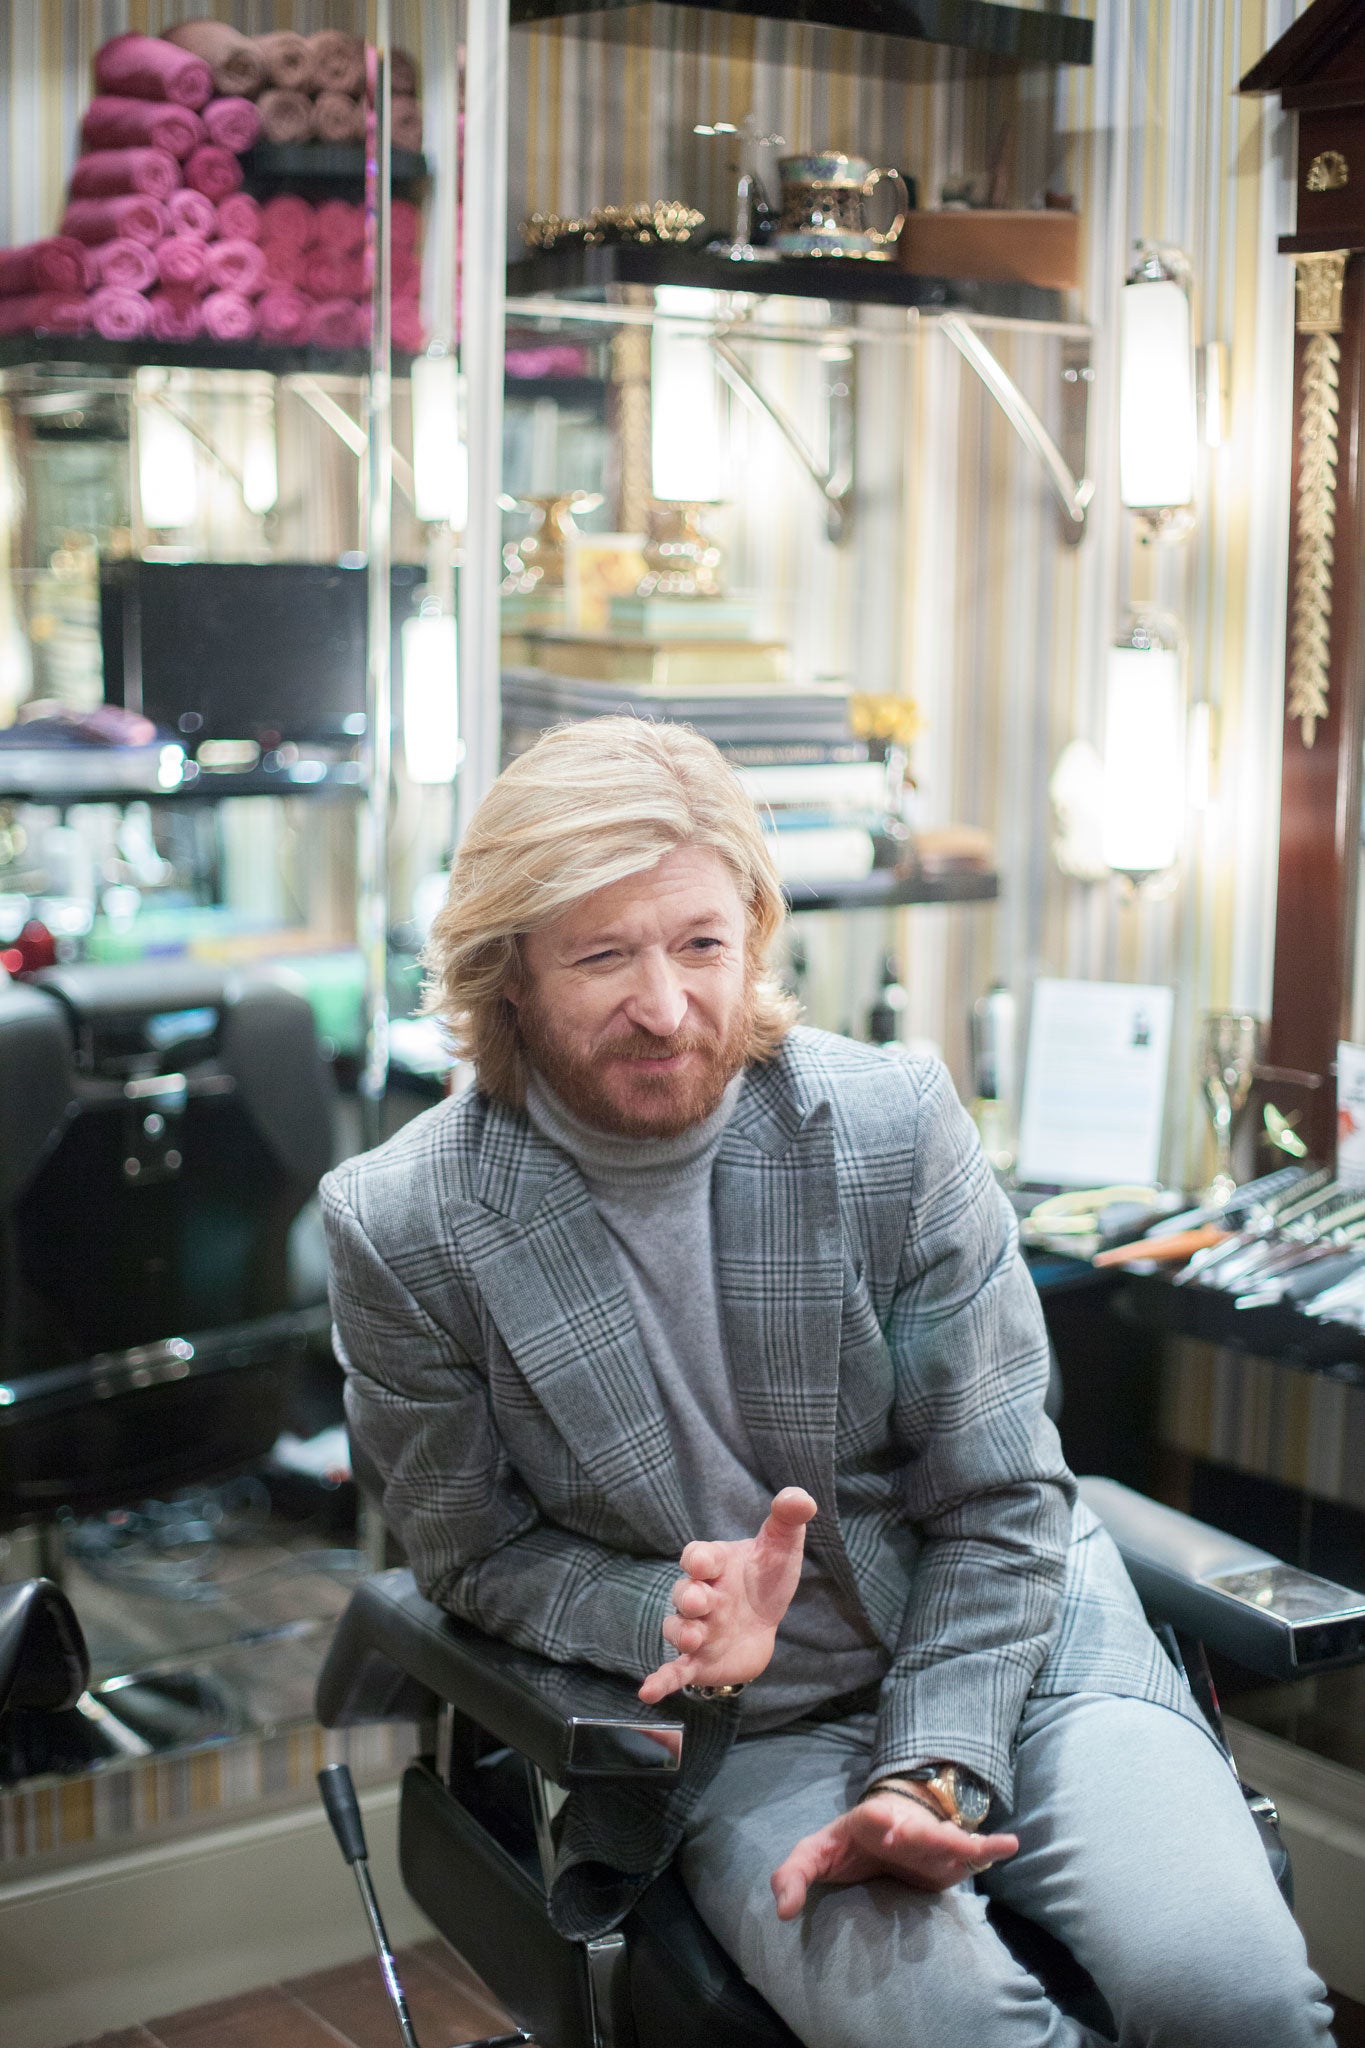 Blond ambition: 'At my age, I'm just thrilled that I still have any hair'